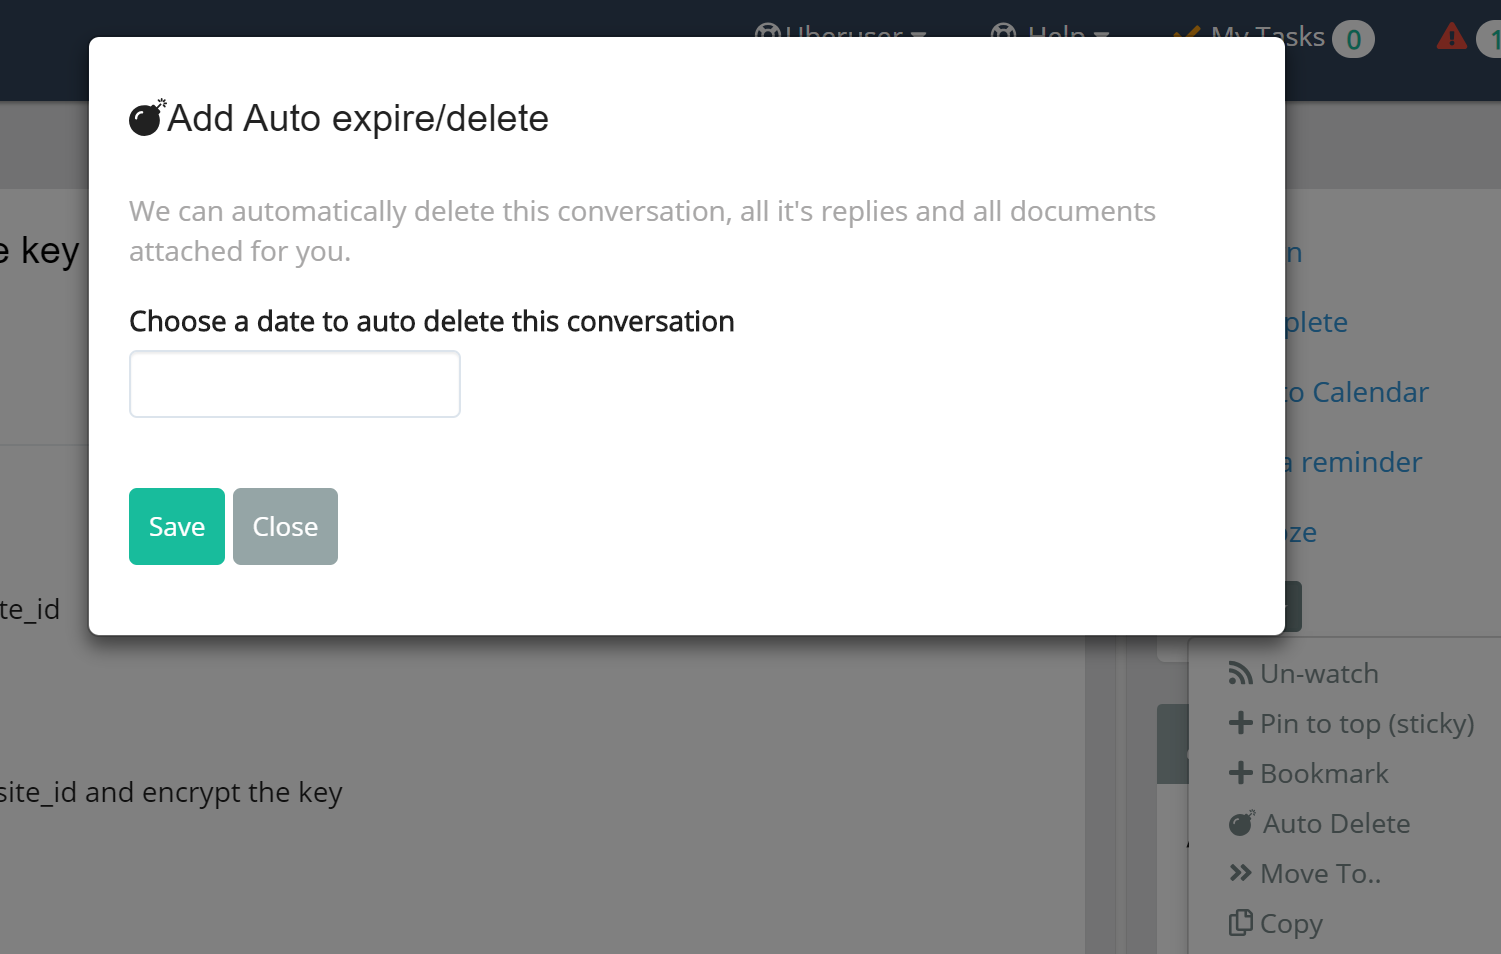 We can automatically delete a conversation and documents after a set date